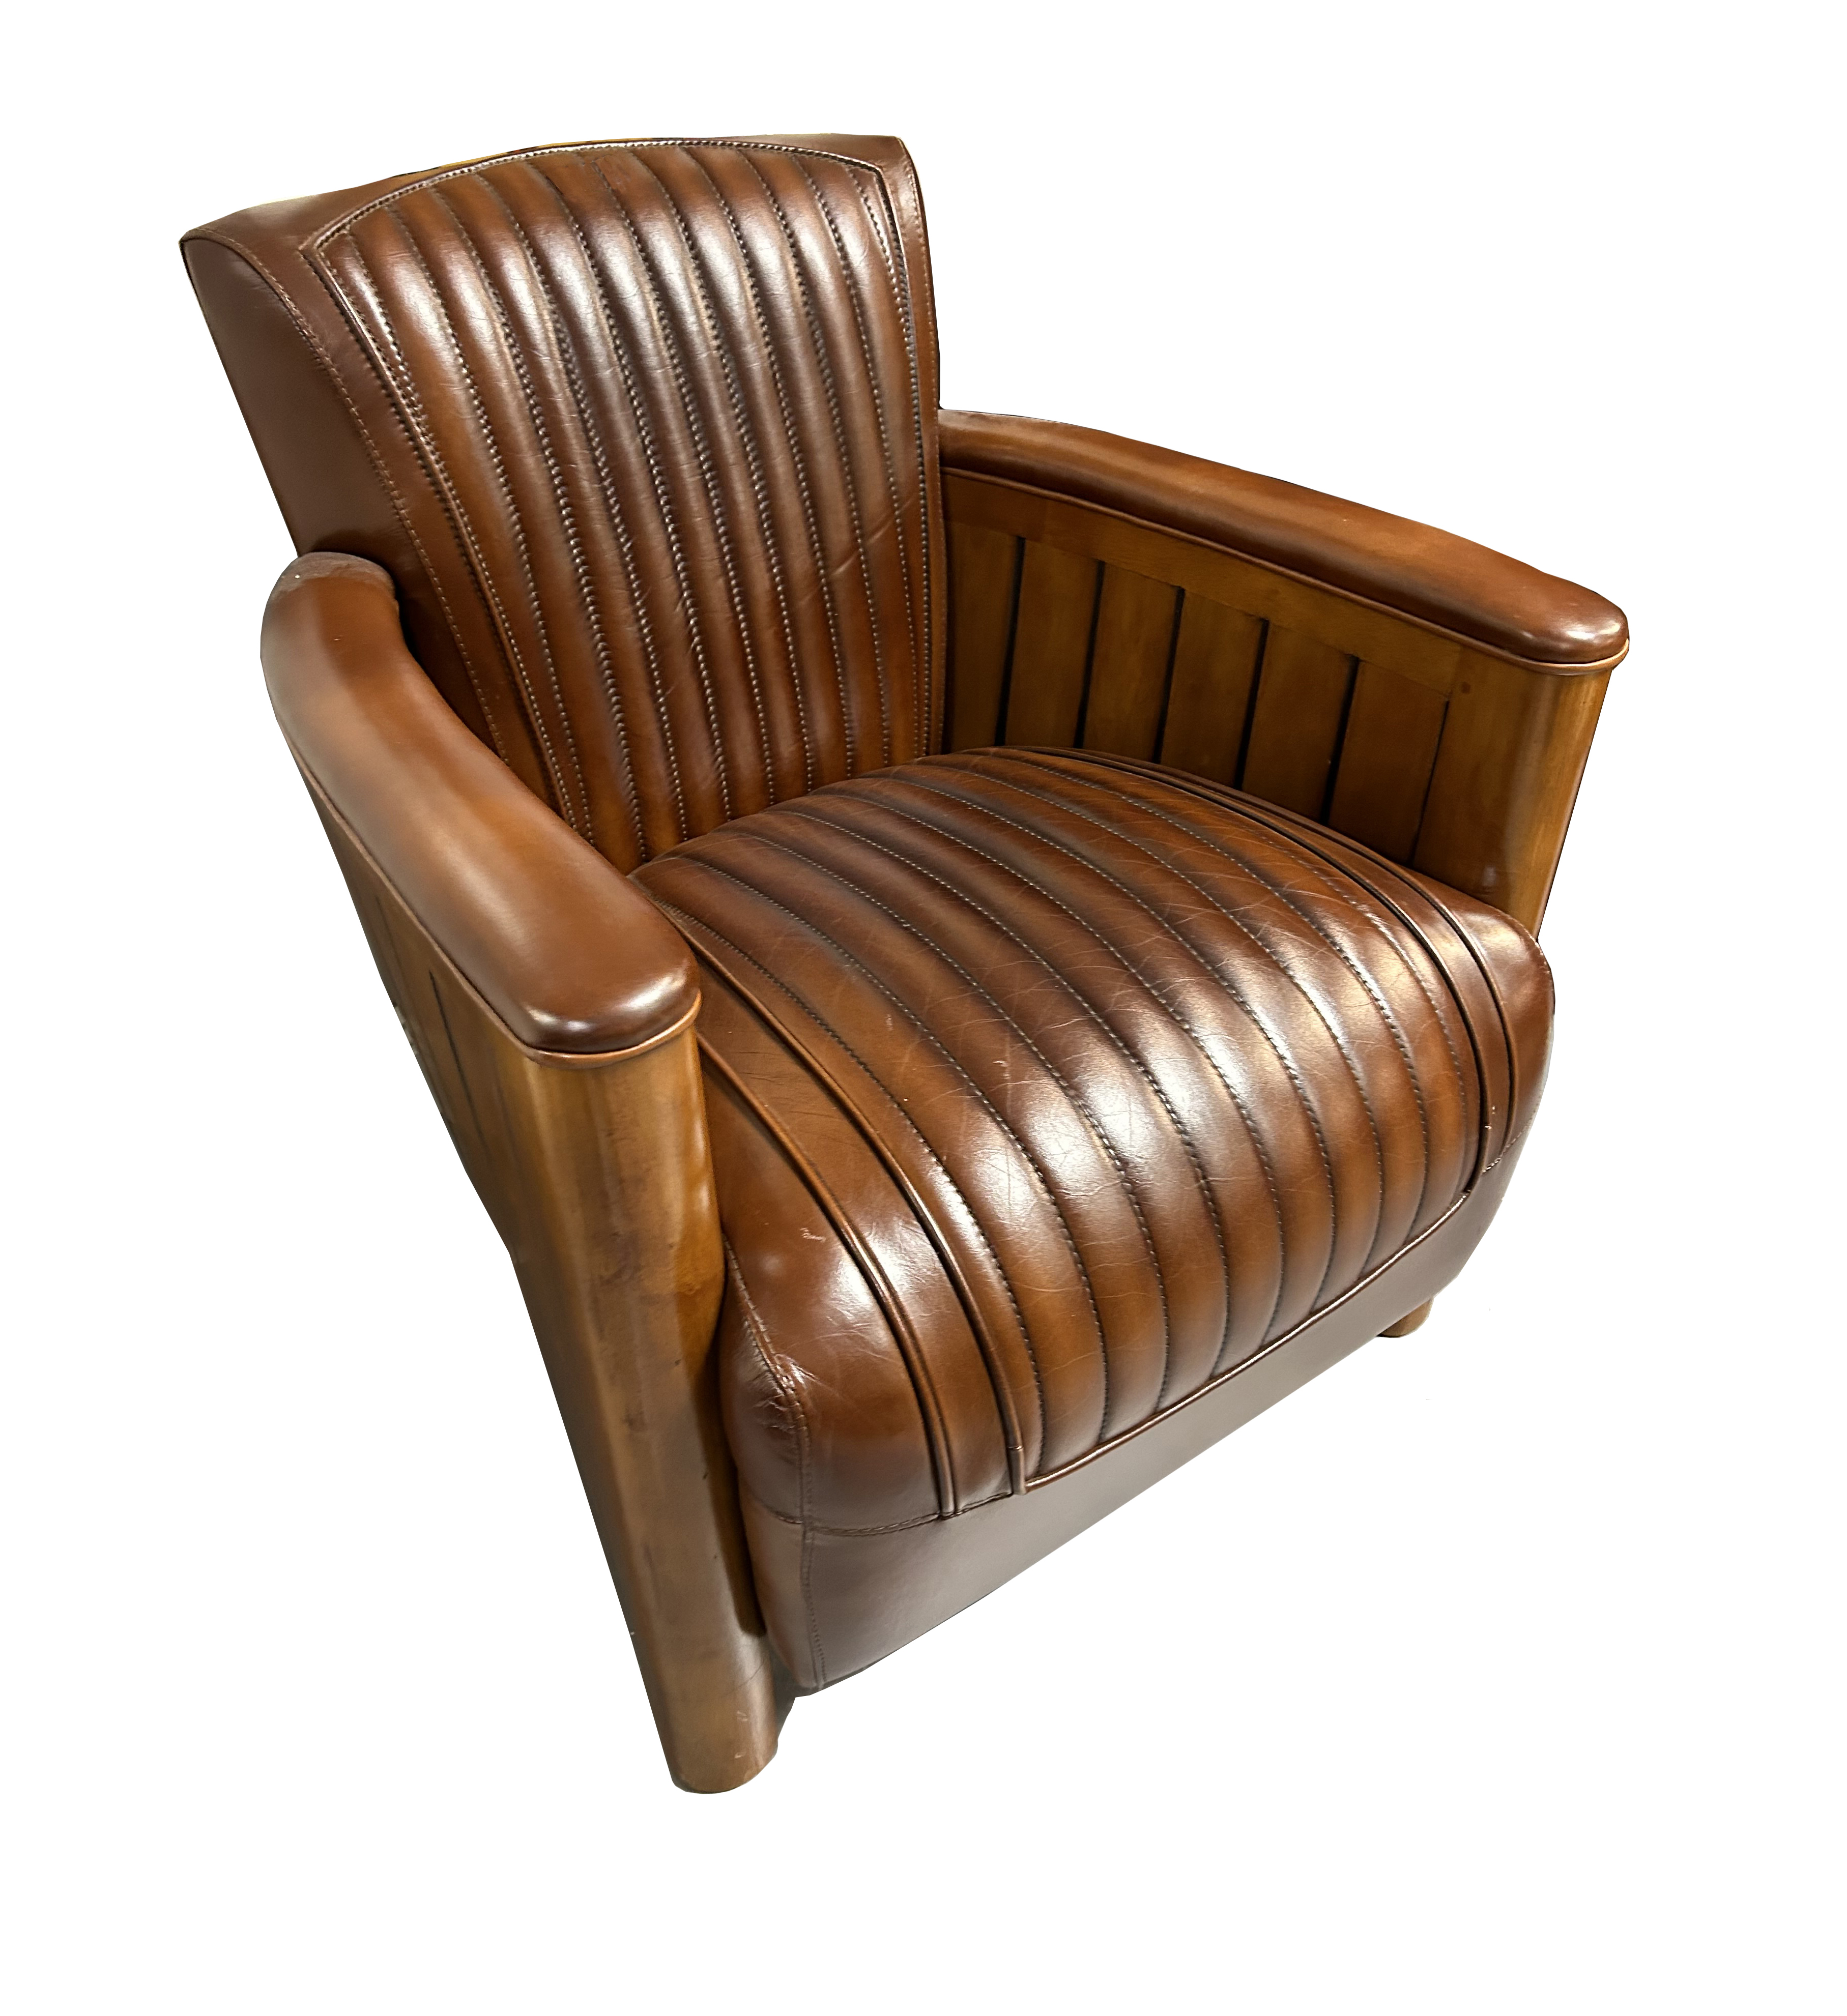 DESIGNER LEATHER V-SHAPED CLUB ARMCHAIR - Image 2 of 3